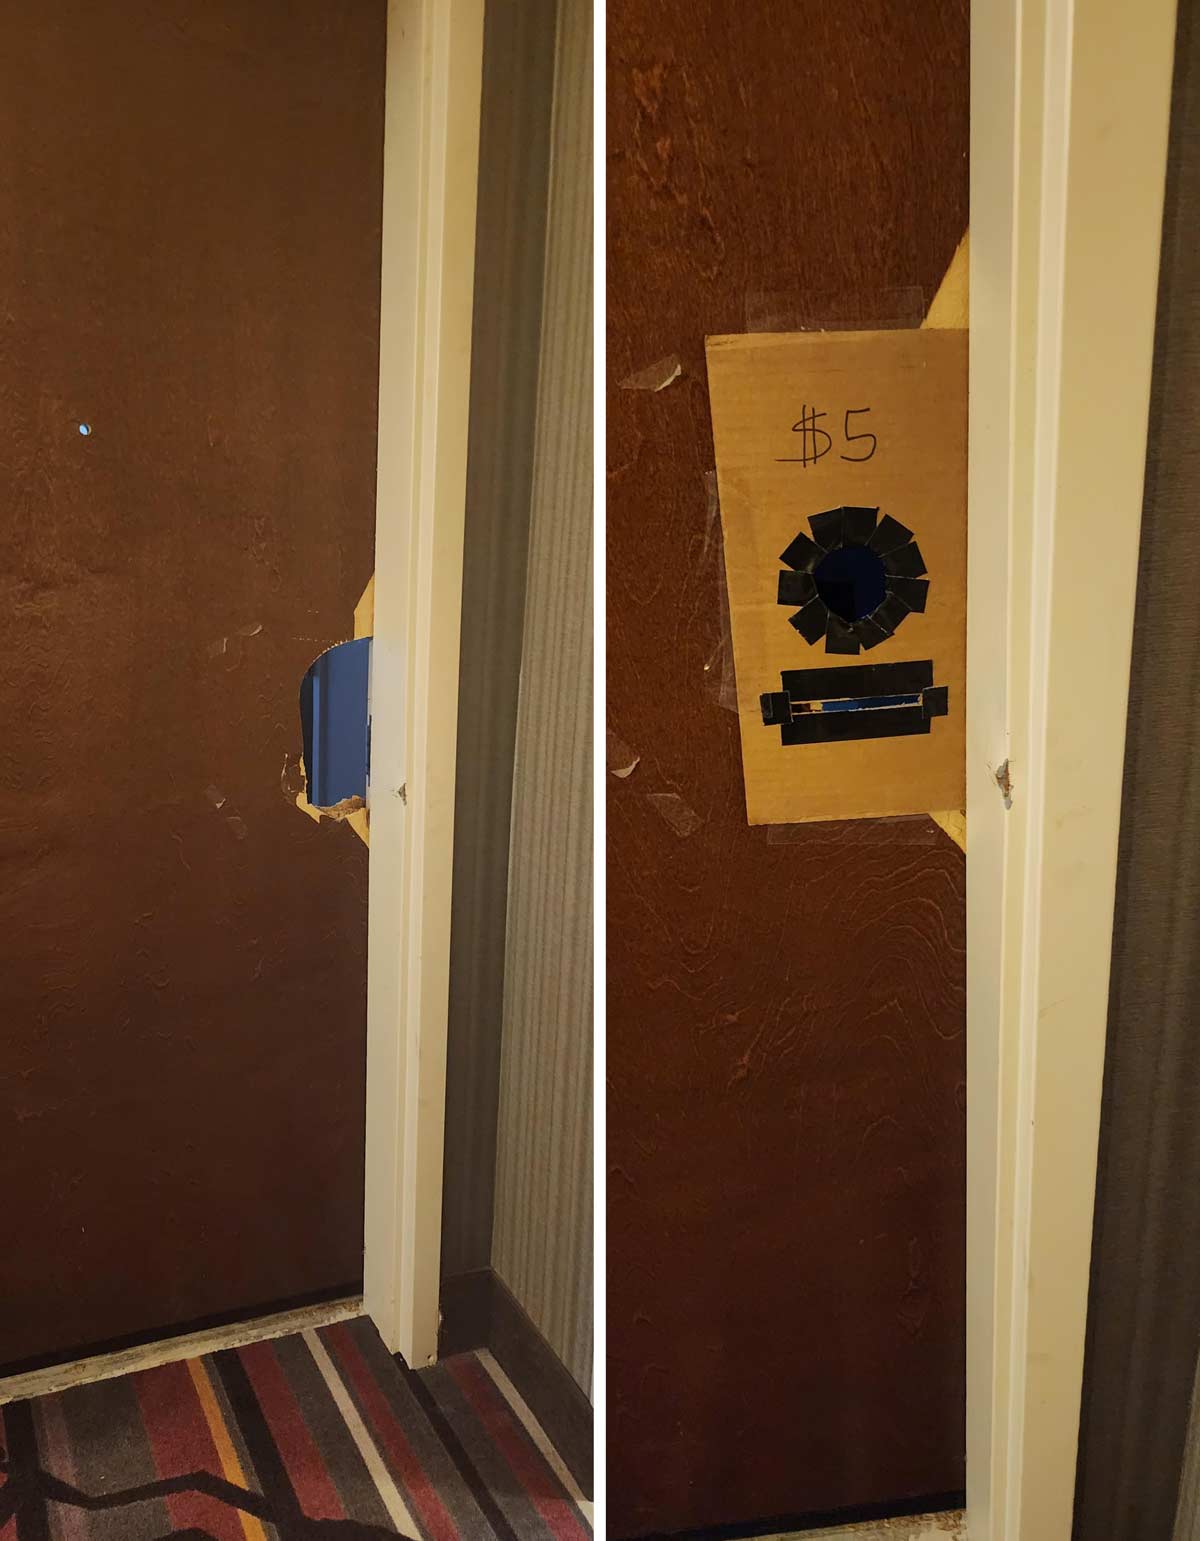 The hotel I'm staying at had a broken door so I fixed it for them